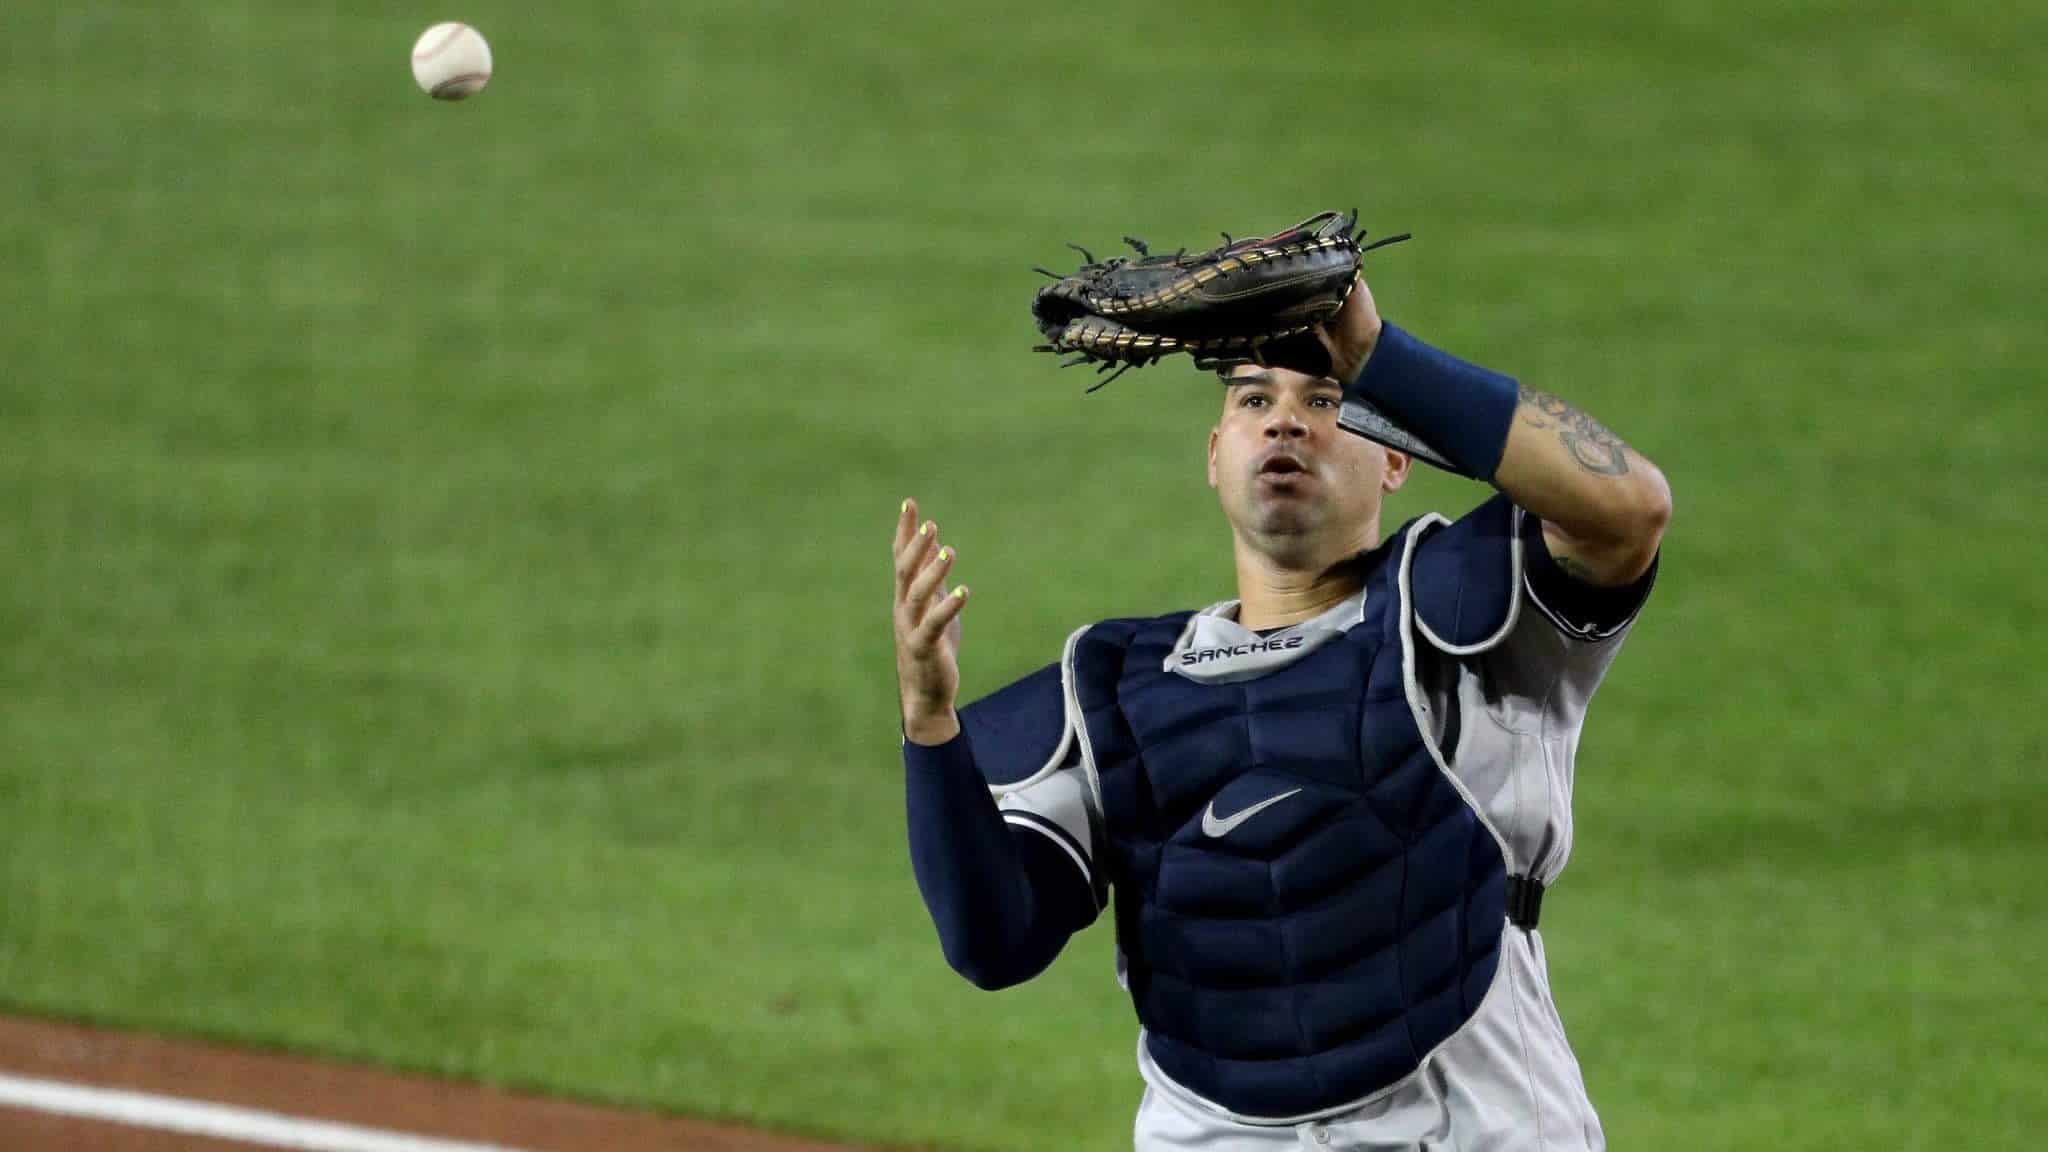 BUFFALO, NEW YORK - SEPTEMBER 08: Gary Sanchez #24 of the New York Yankees reacts while dropping a foul ball hit by Cavan Biggio #8 of the Toronto Blue Jays during the fifth inning at Sahlen Field on September 08, 2020 in Buffalo, New York. The Blue Jays are the home team and are playing their home games in Buffalo due to the Canadian government’s policy on coronavirus (COVID-19).